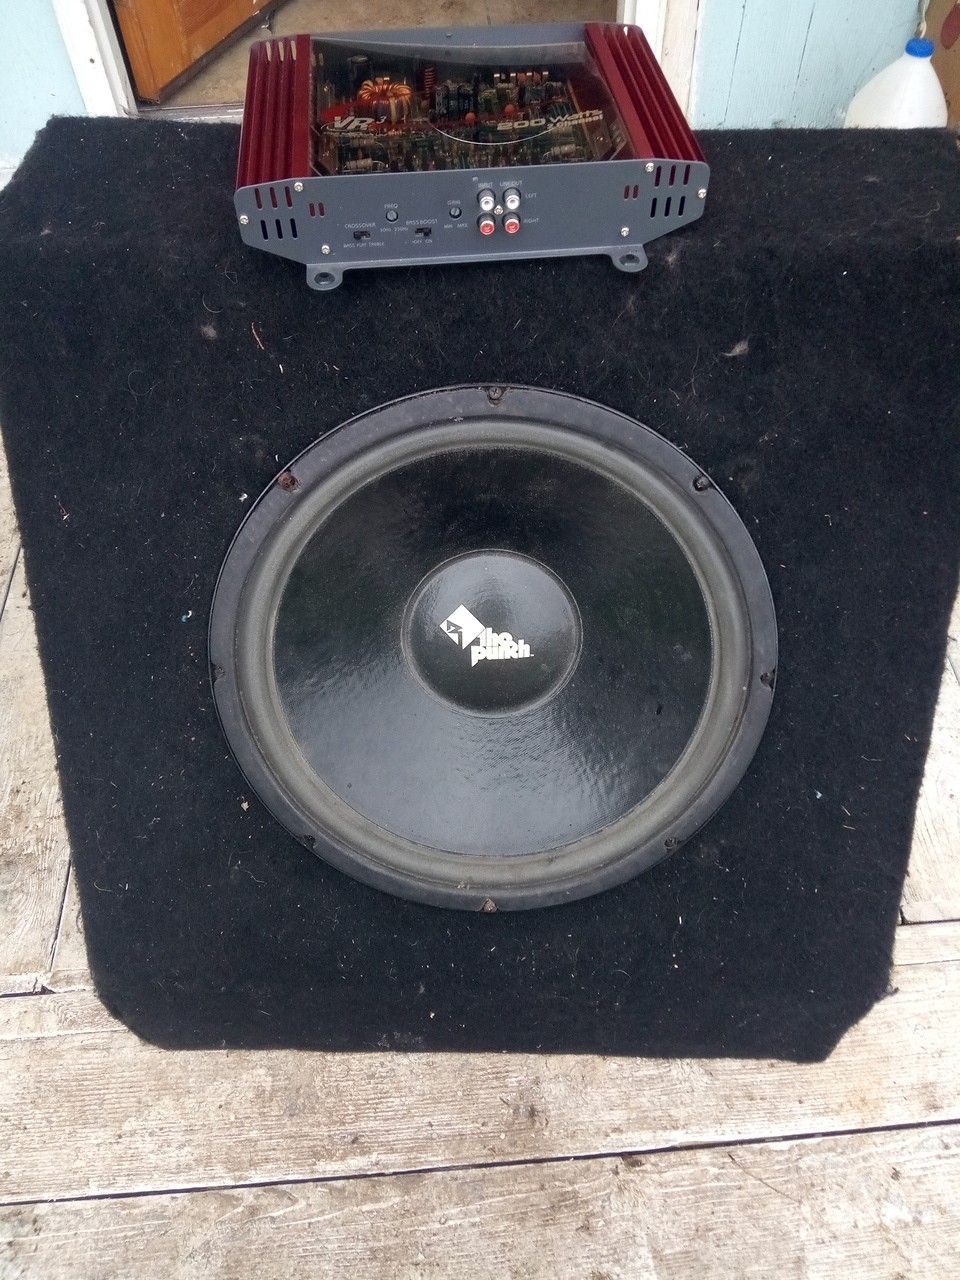 Rockford fosgate the punch 15 inch subwoofer